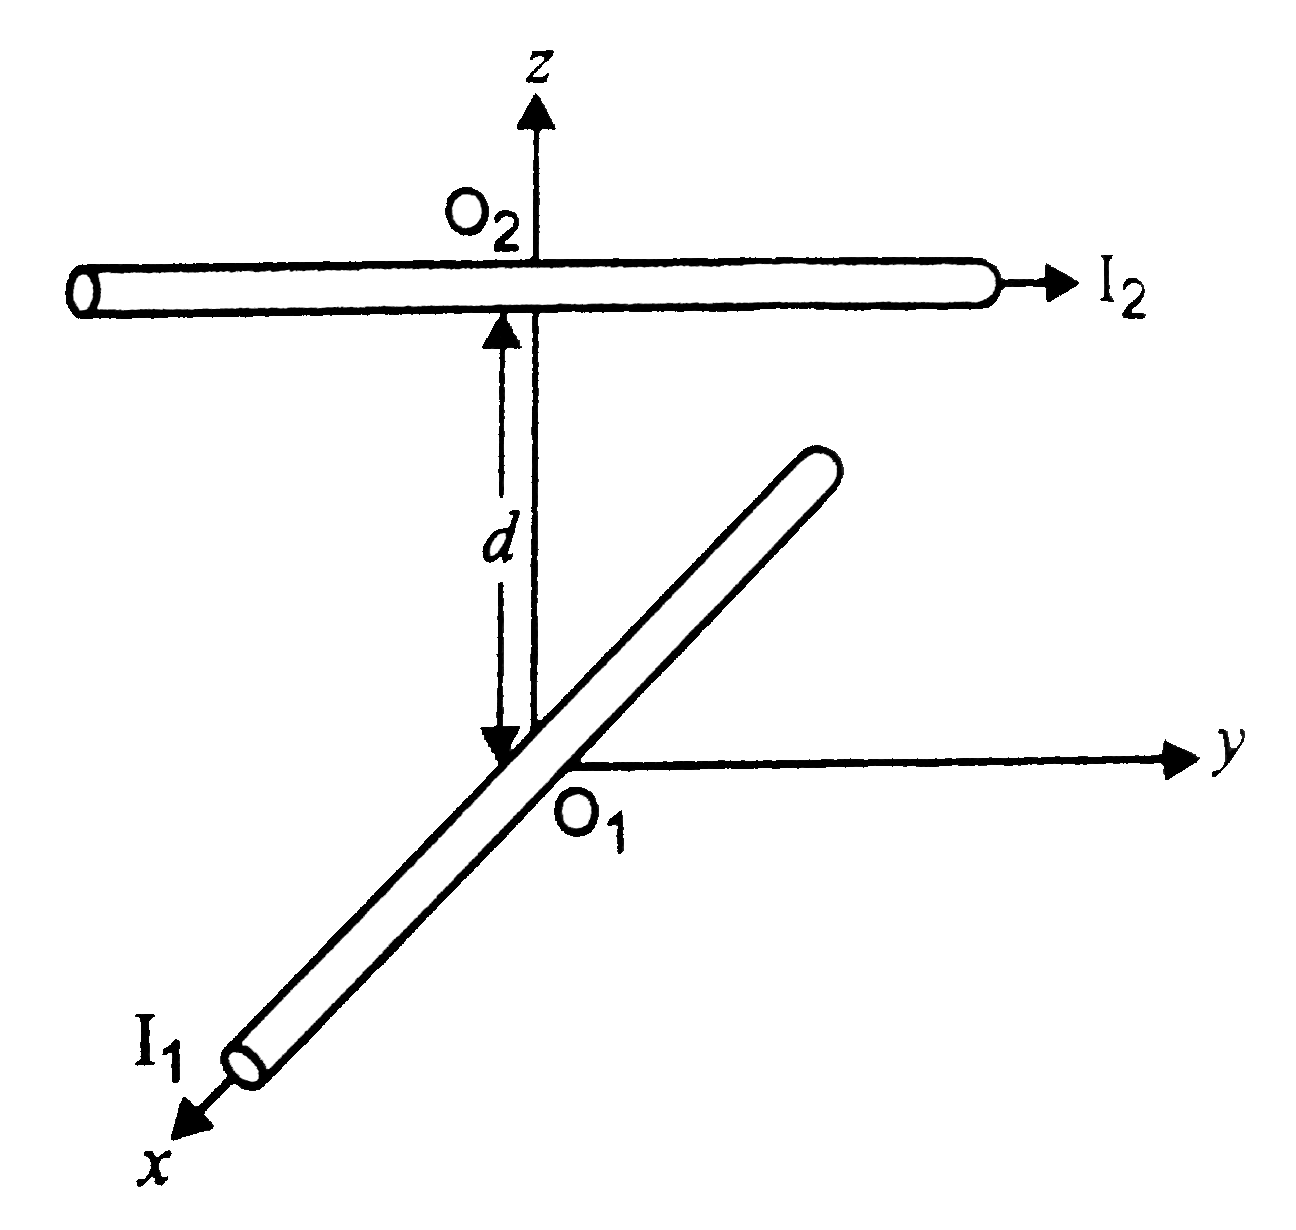 Two long wires carrying current I1 and I2 are arranged as shown in figure. The one carrying current I1 is along the x-axis. The other carrying current I2 is along a line parallel to the y-axis given by x=0 and z=d. Find the force exerted at O2 because of the wire along the x-axis.